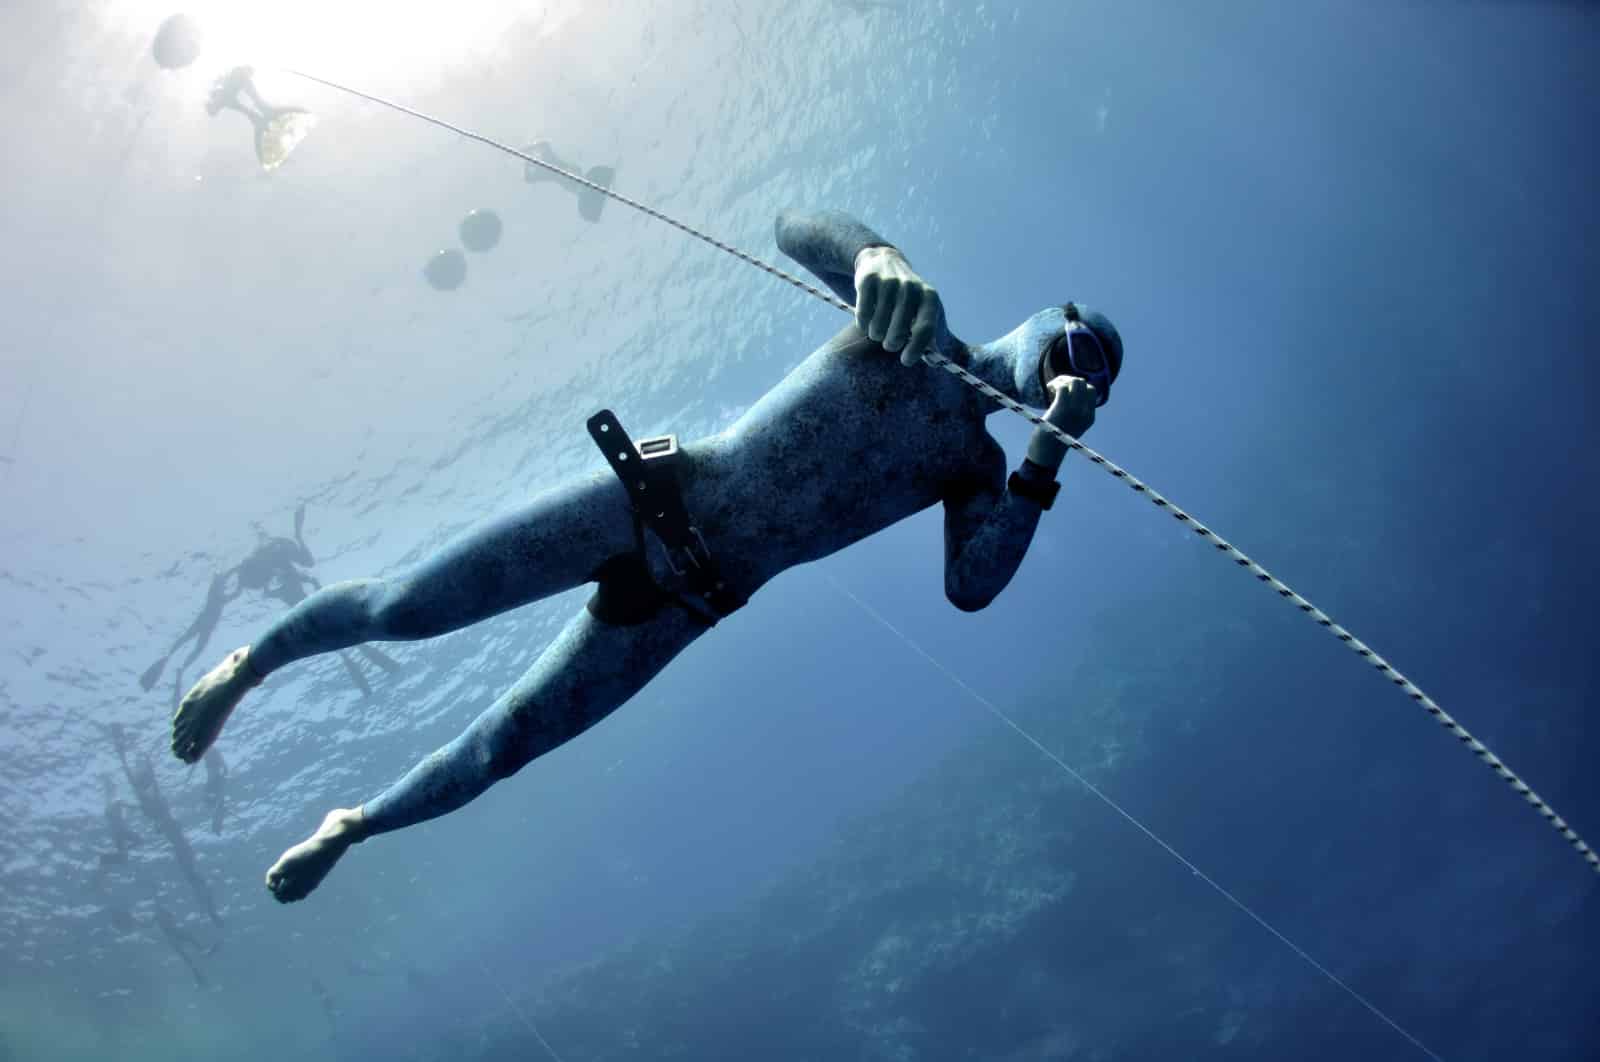 Freediver makes preparation dive near the safety line by breaststroke. Picture shows a part of freediving training session in Blue Hole, Dahab, Egypt